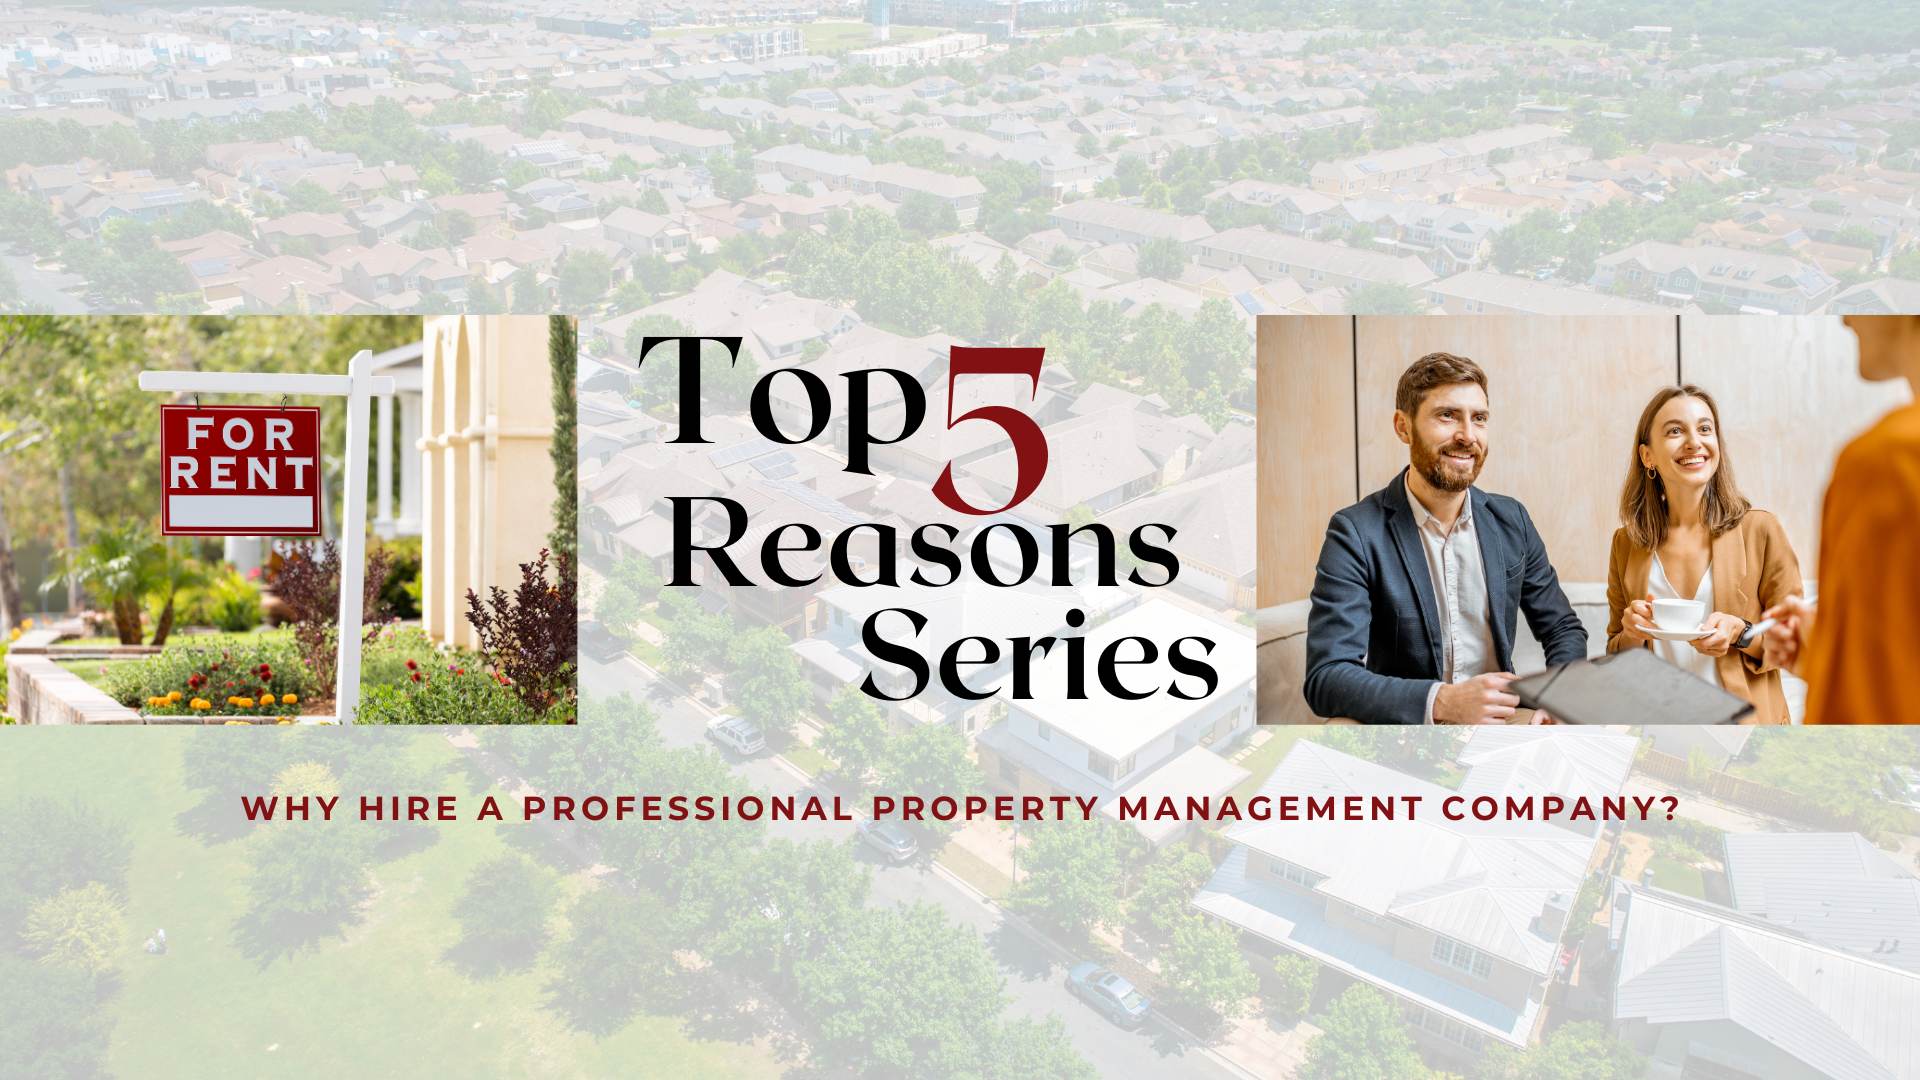 Top 5 Reasons Series: Why Hire A Professional Property Management Company?